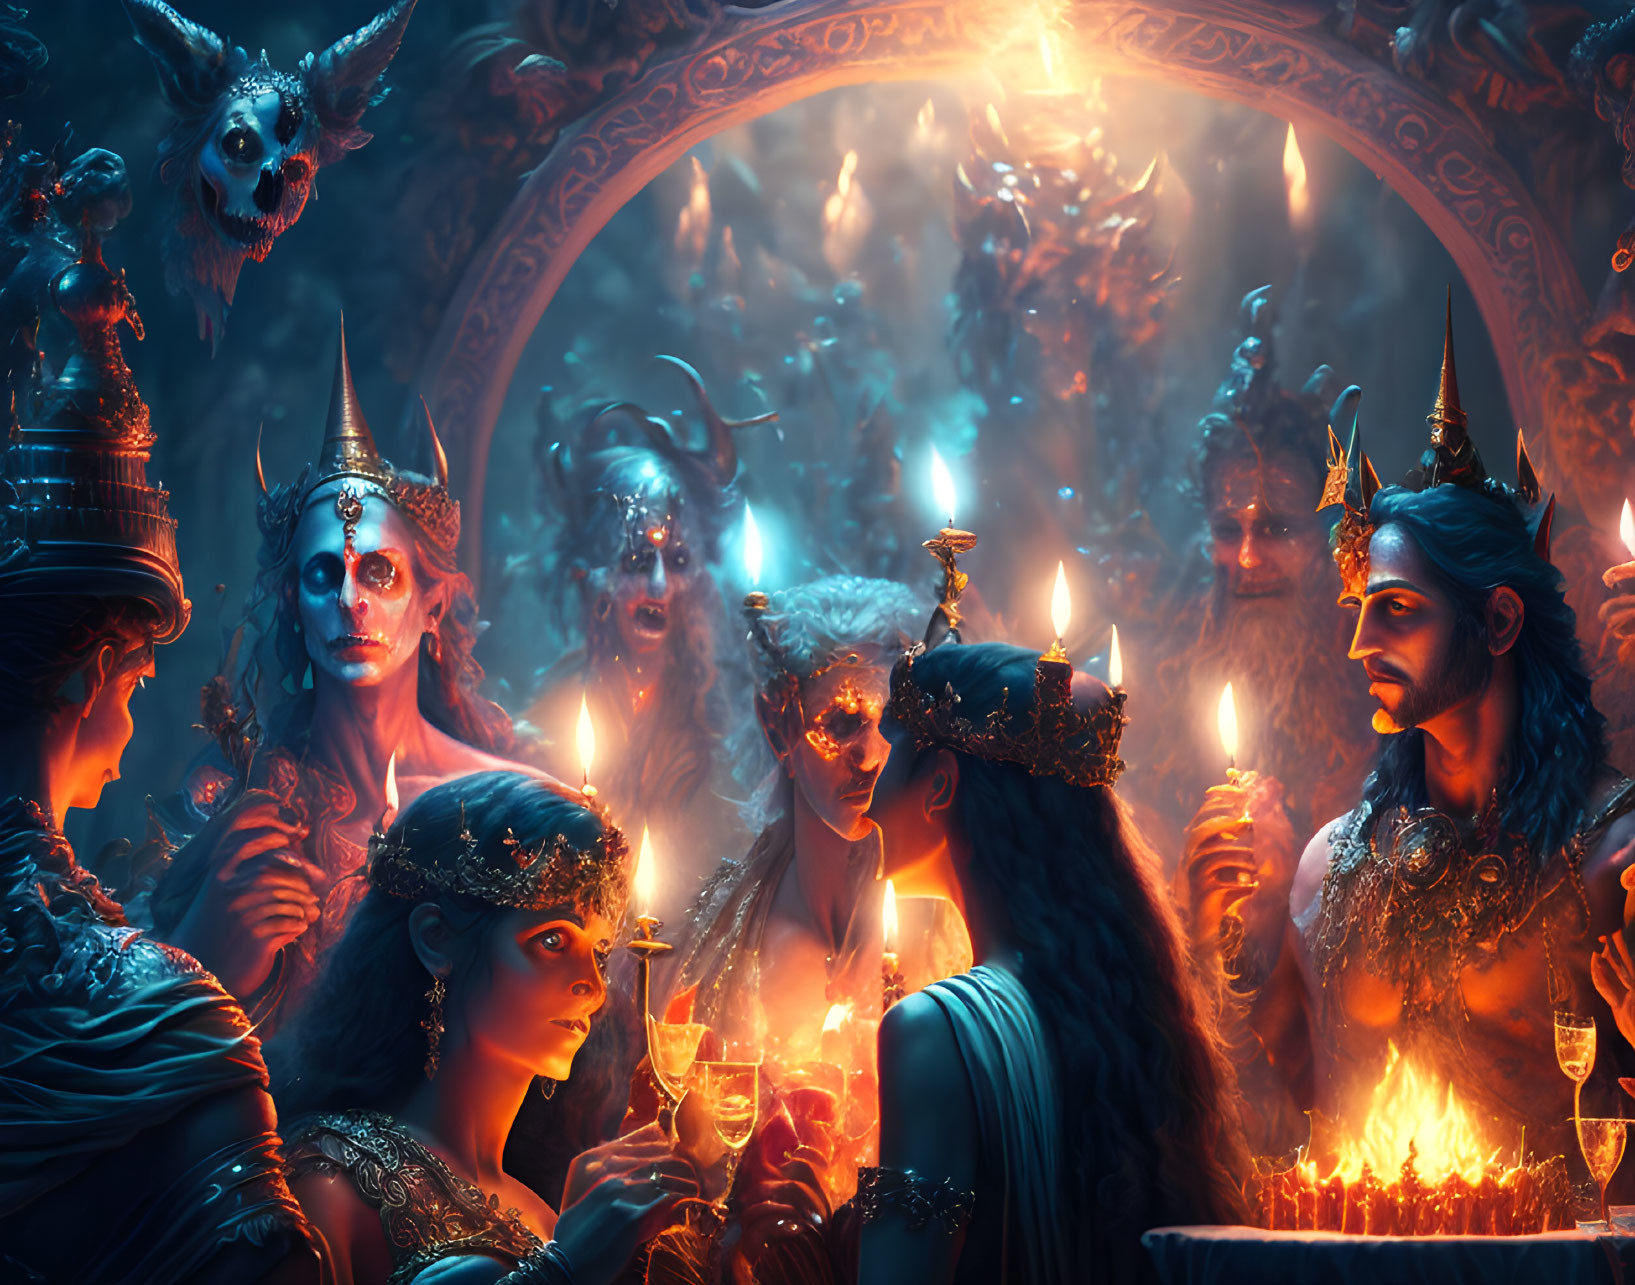 Mystical gathering with ornate attire, candles, blue and orange tones